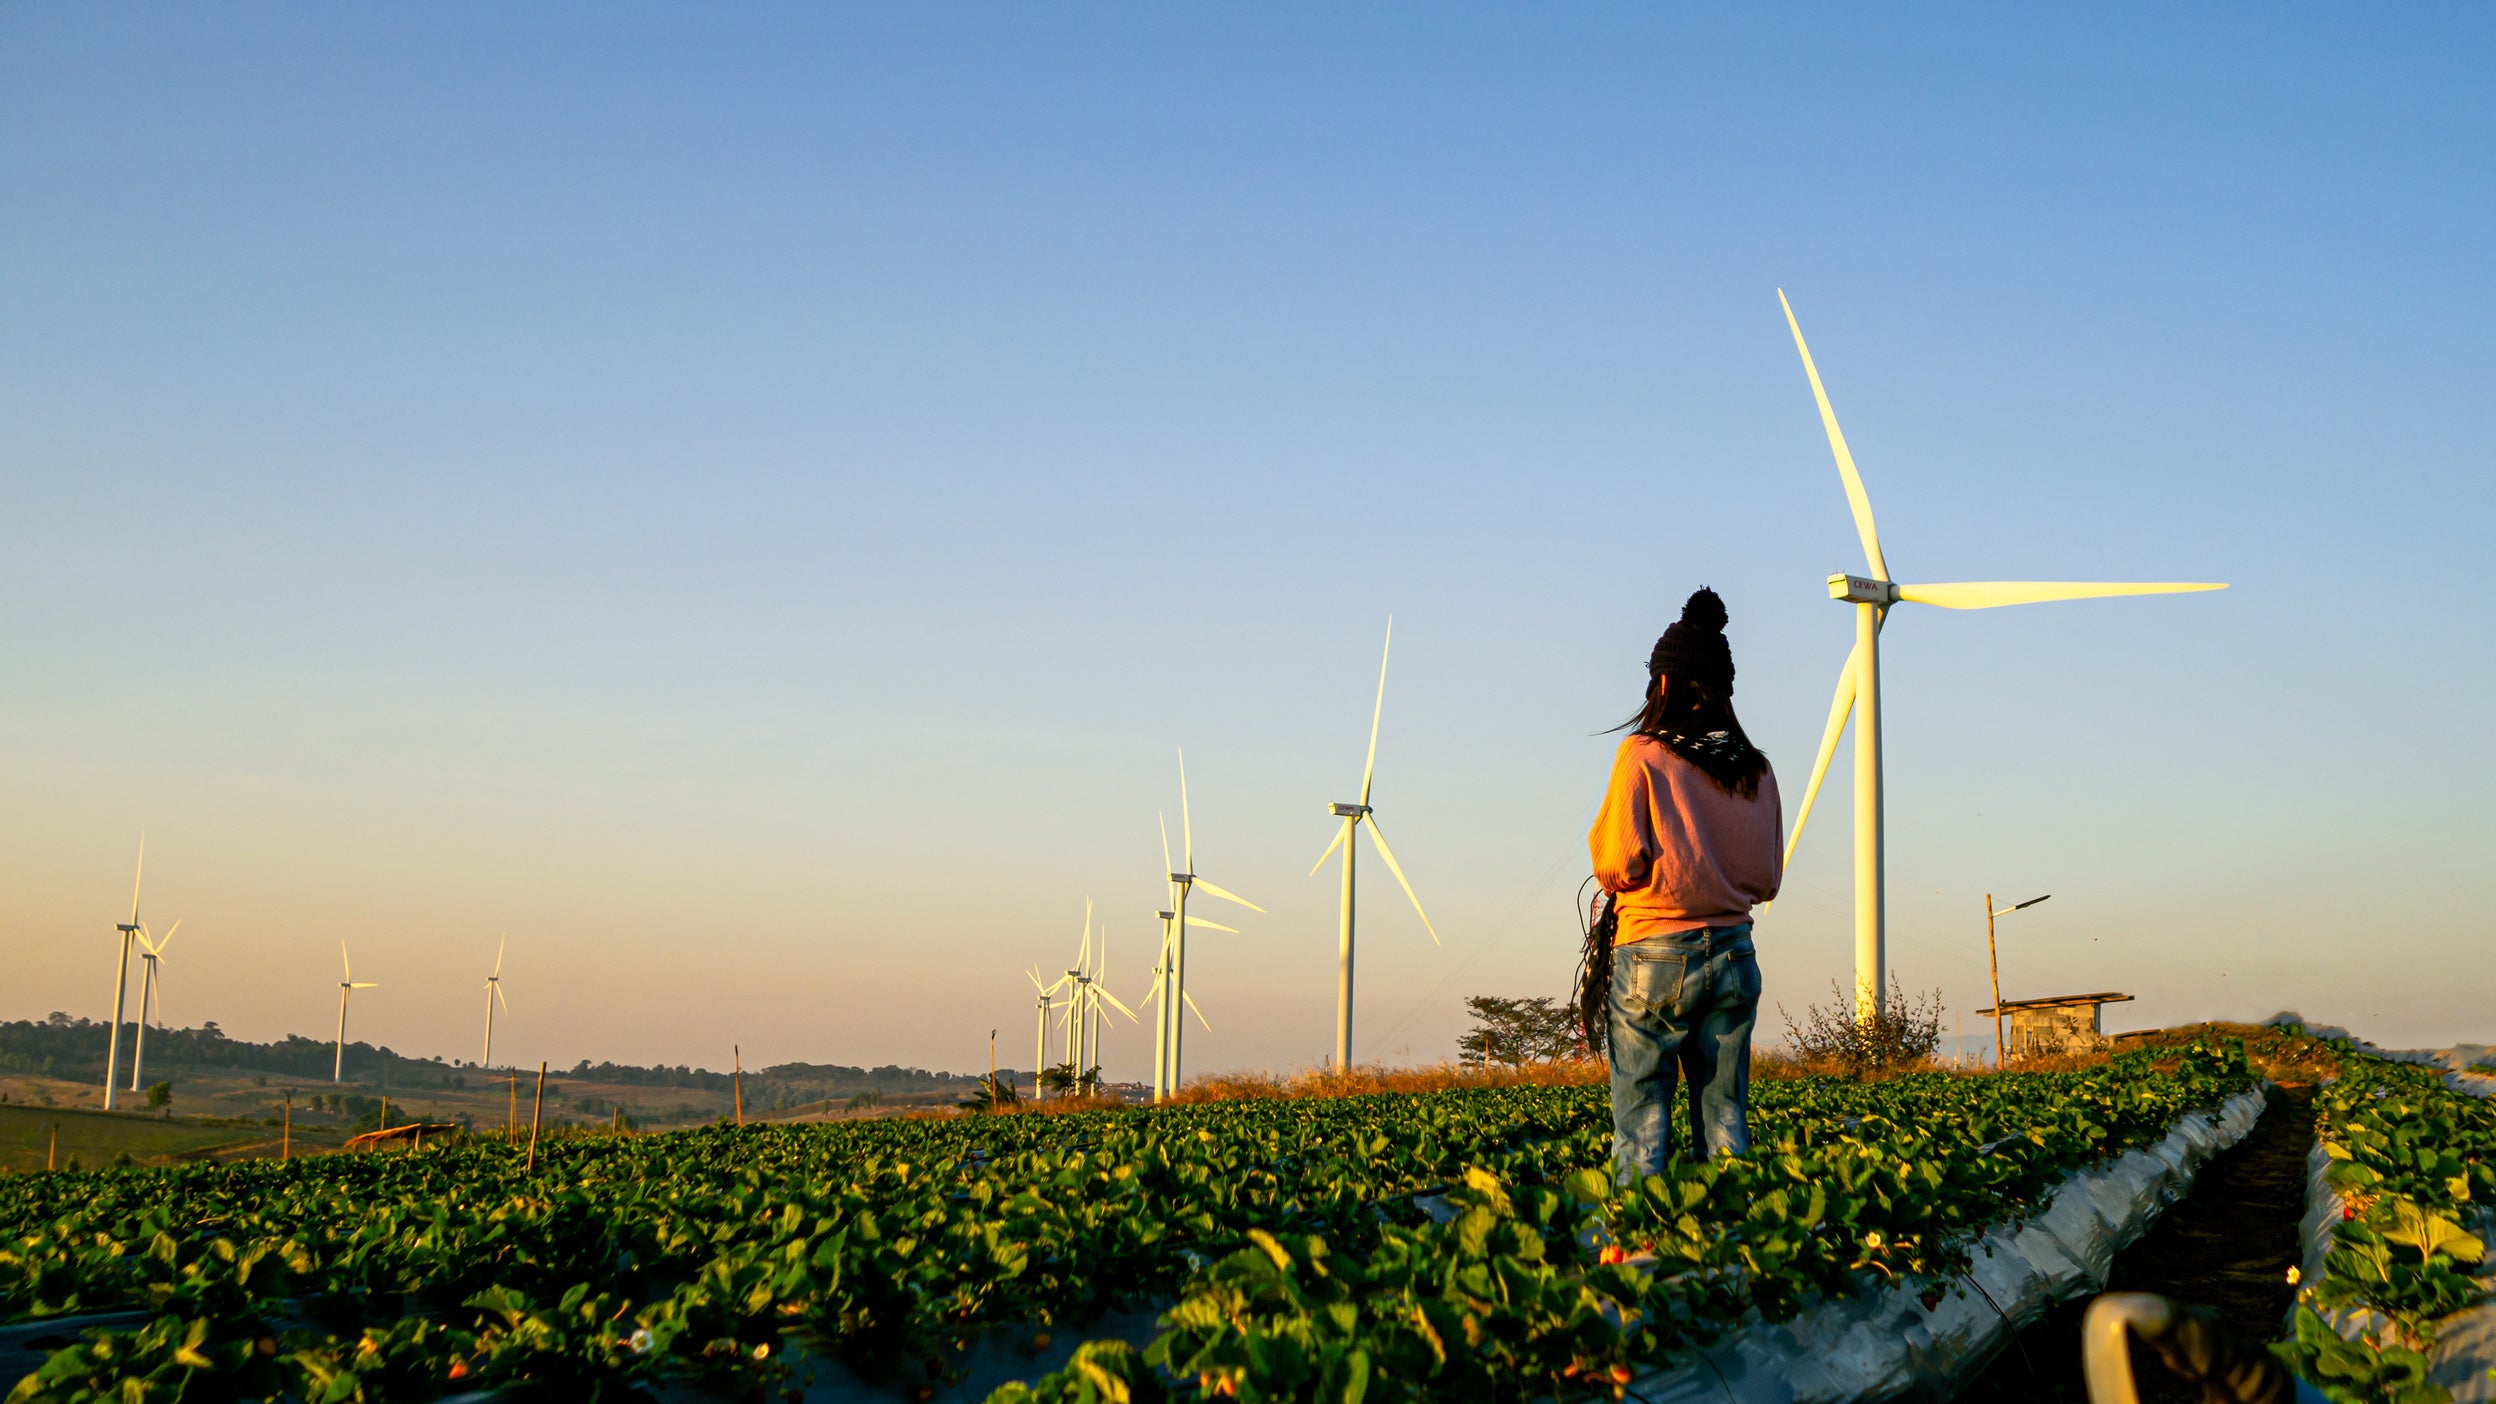 A woman standing on a field with wind turbines in the background